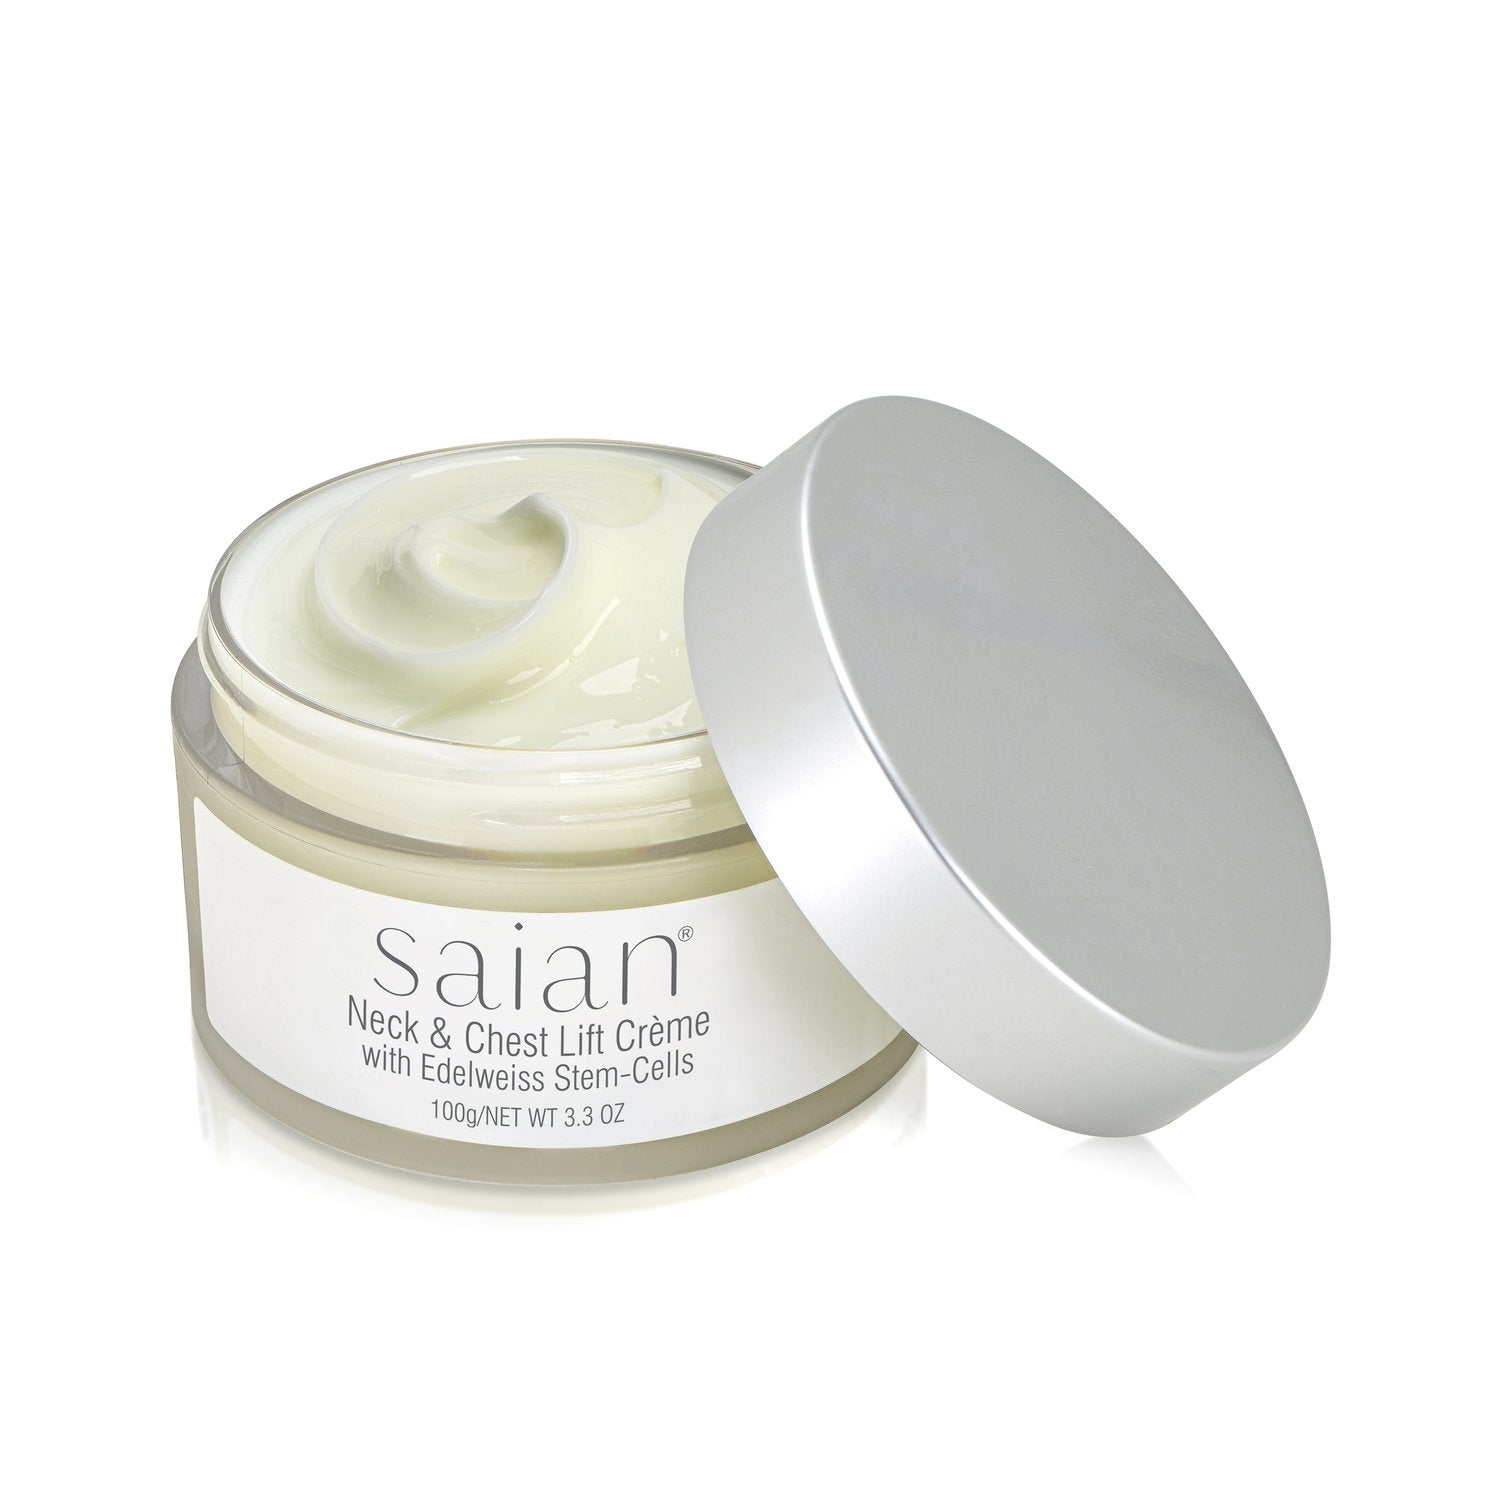 Saian Neck & Chest Lift Creme With Edelweiss Stem Cells